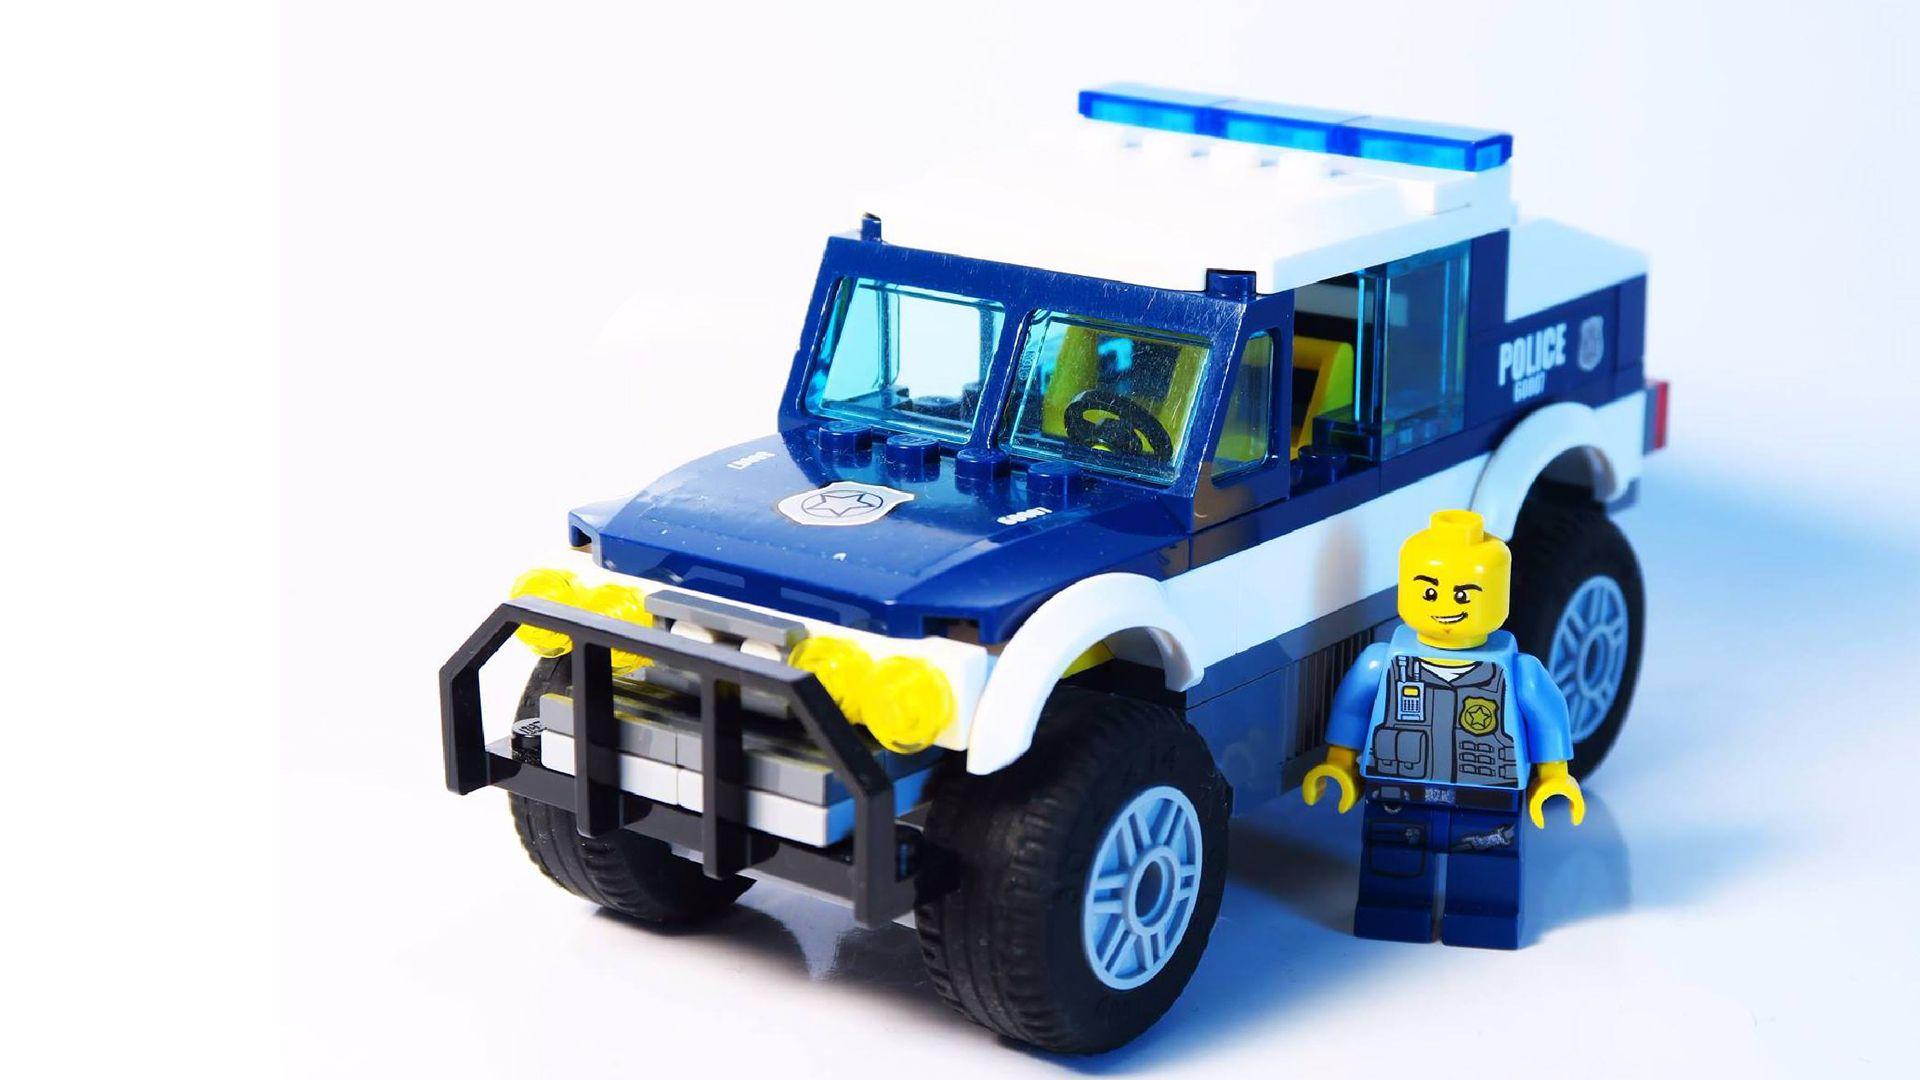 Lego Police Wallpapers - Top Free Lego Police Backgrounds - Wallpaperaccess